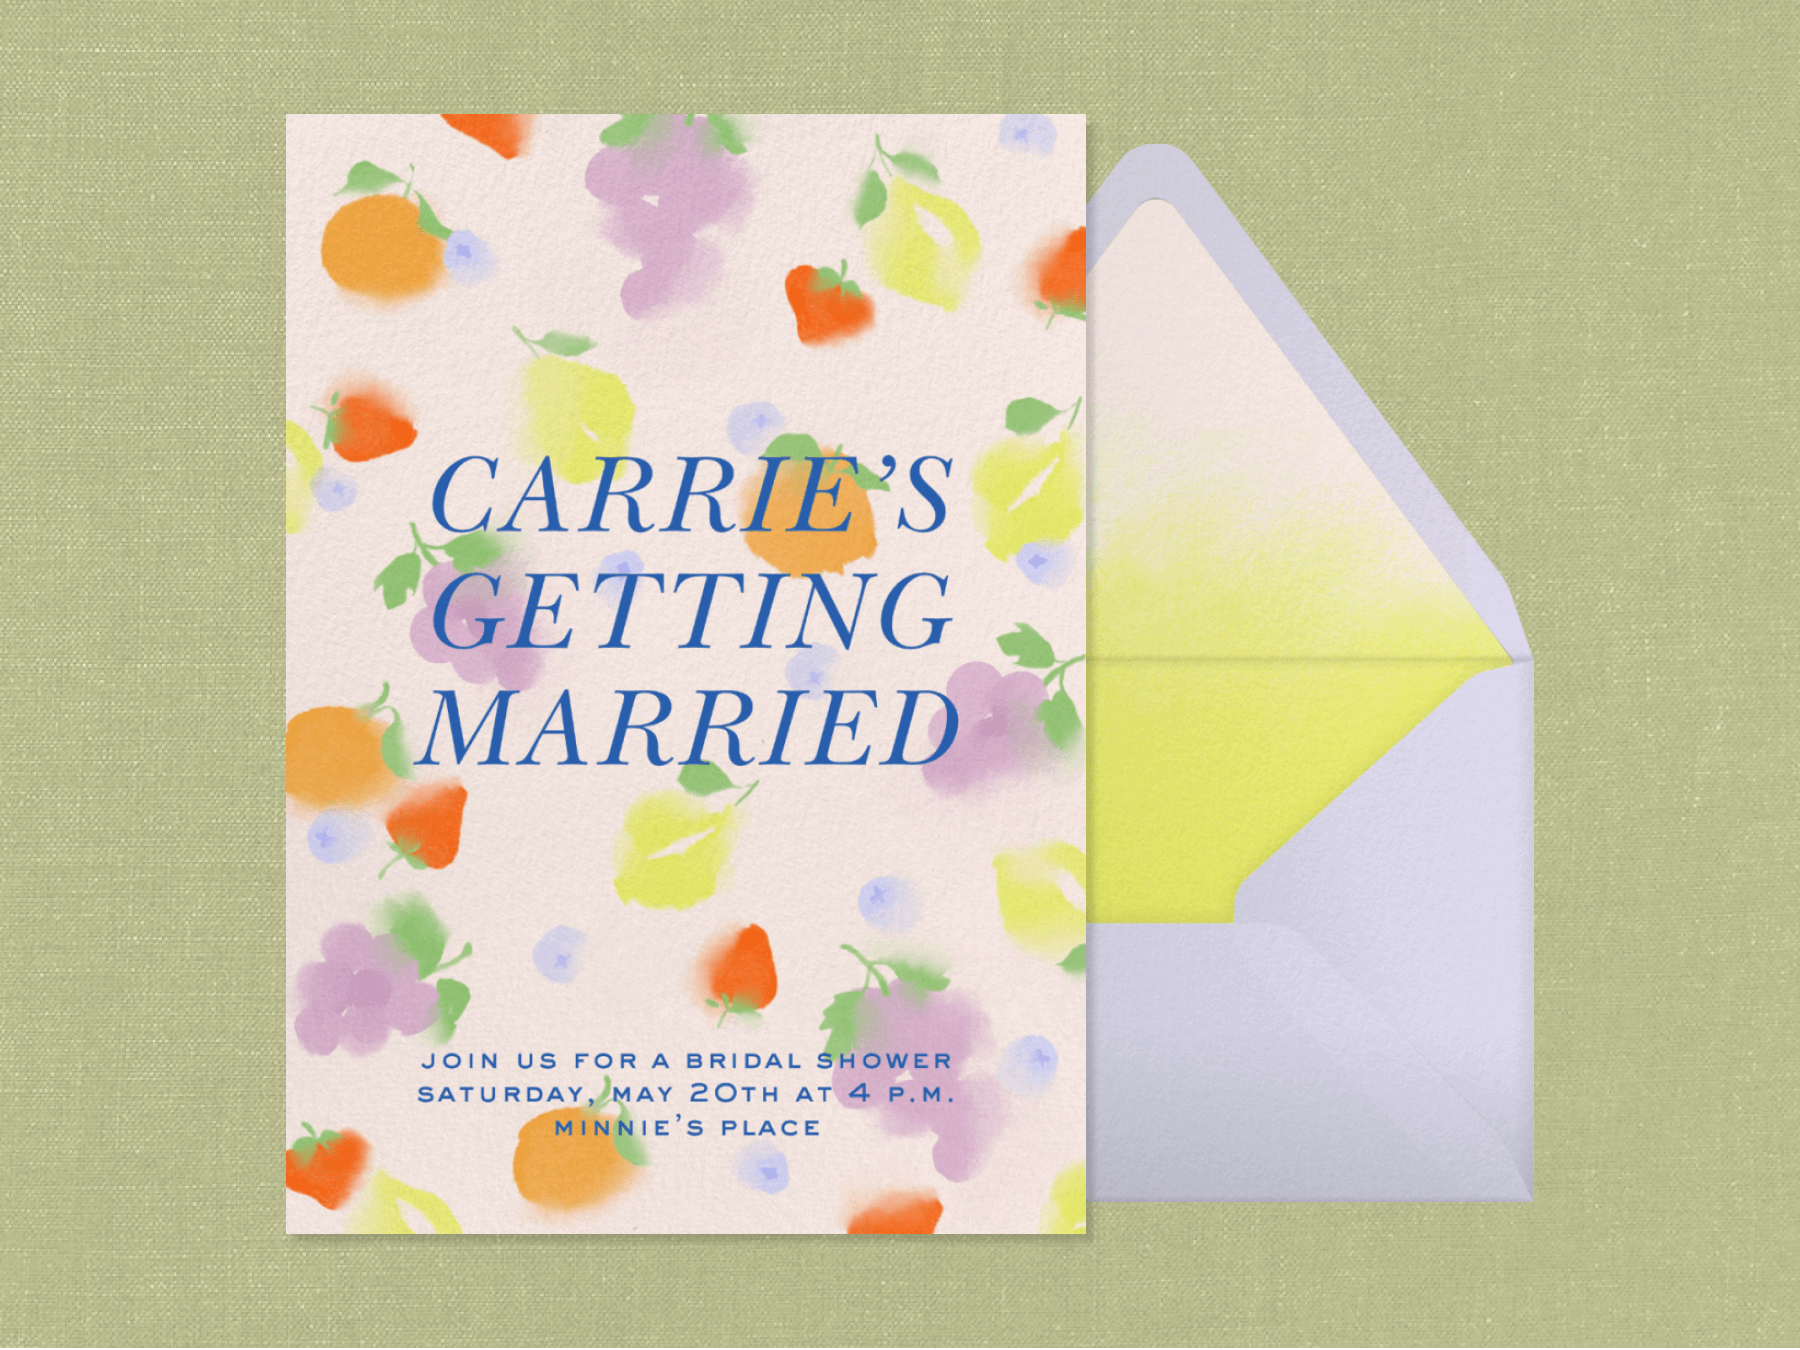 A bridal shower invitation with softly painted oranges, strawberries, grapes, lemons, and blueberries beside an envelope with faded yellow liner.